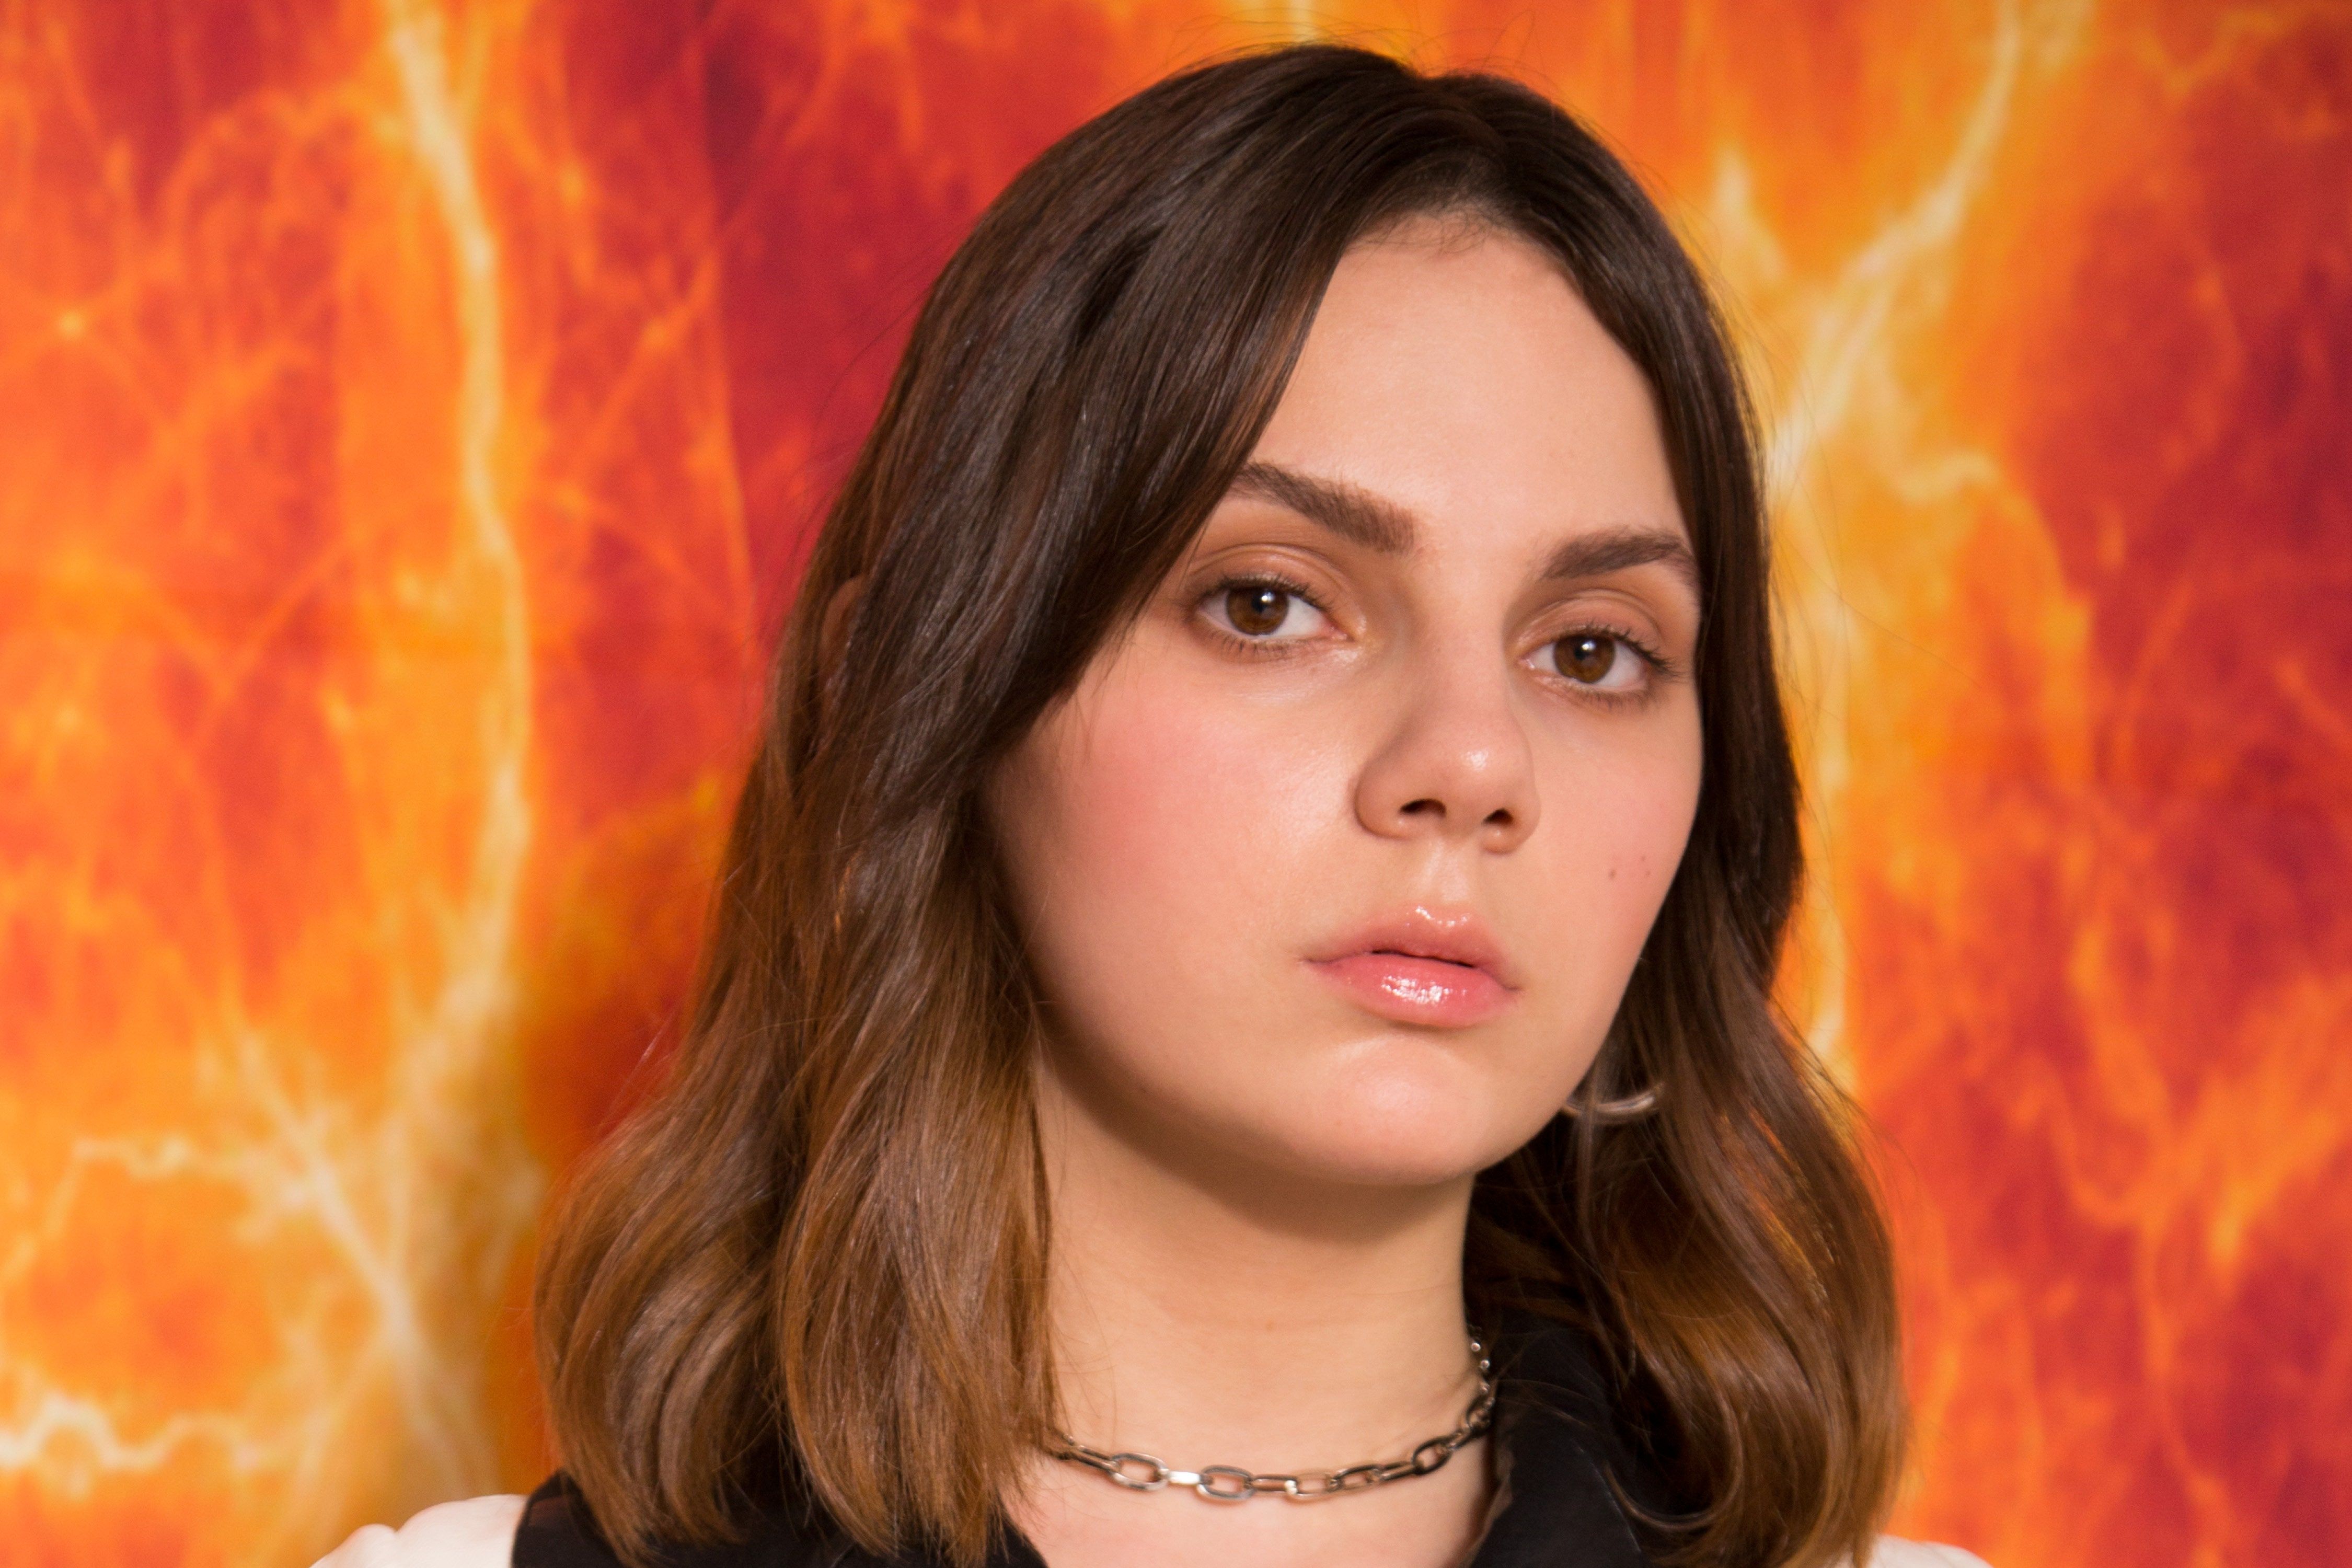 Dafne Keen on Facing the Unexpected.